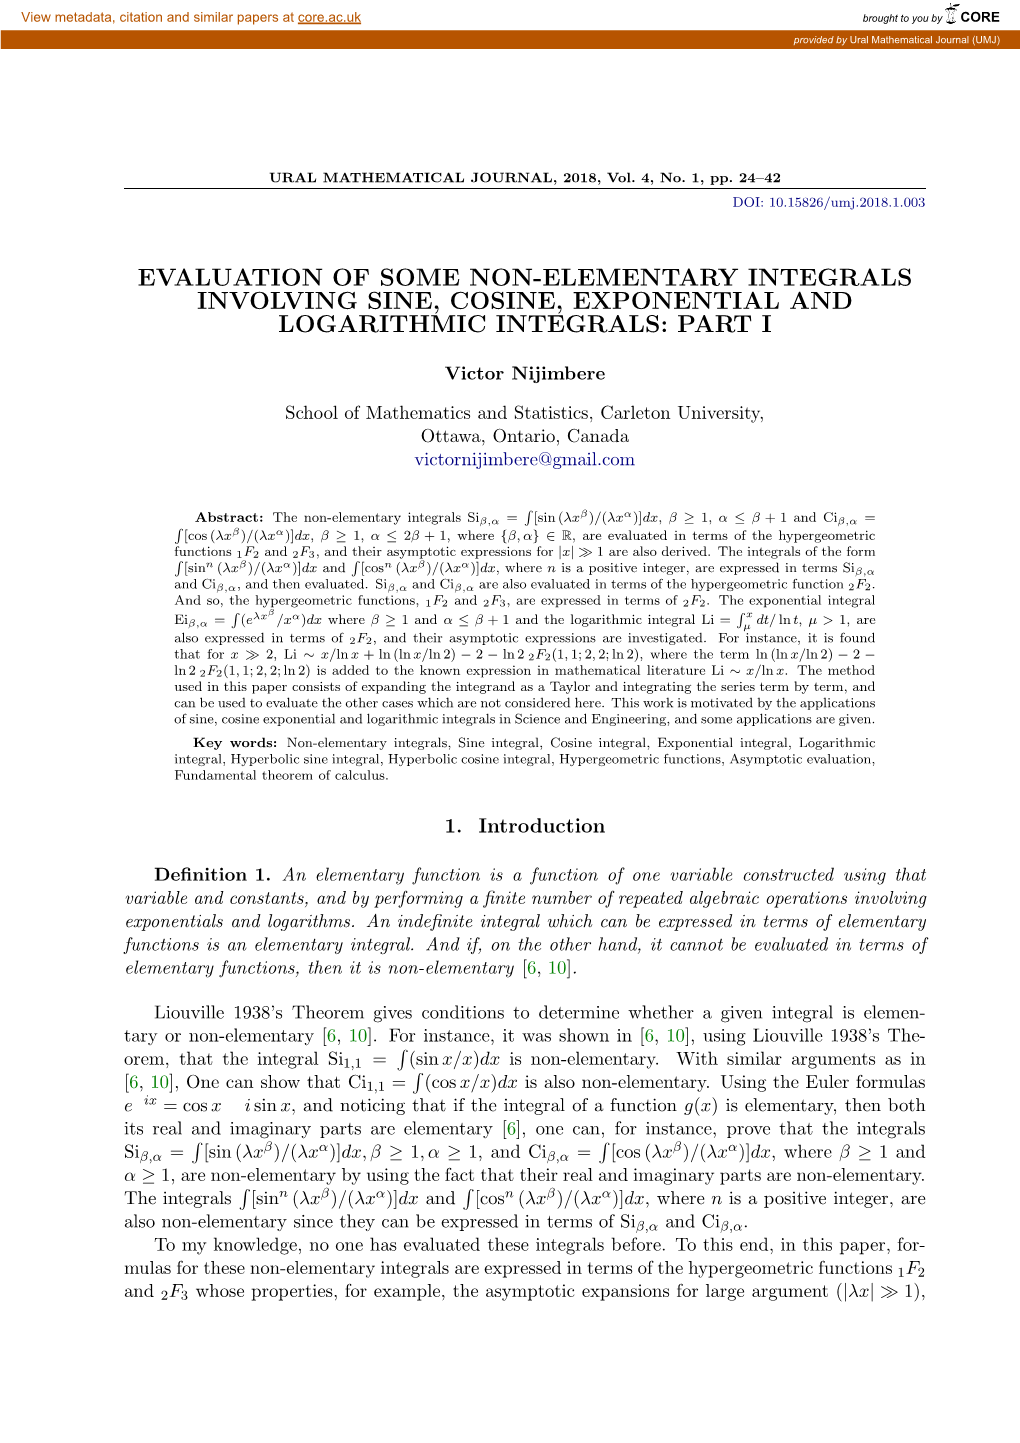 Evaluation of Some Non-Elementary Integrals Involving Sine, Cosine, Exponential and Logarithmic Integrals: Part I